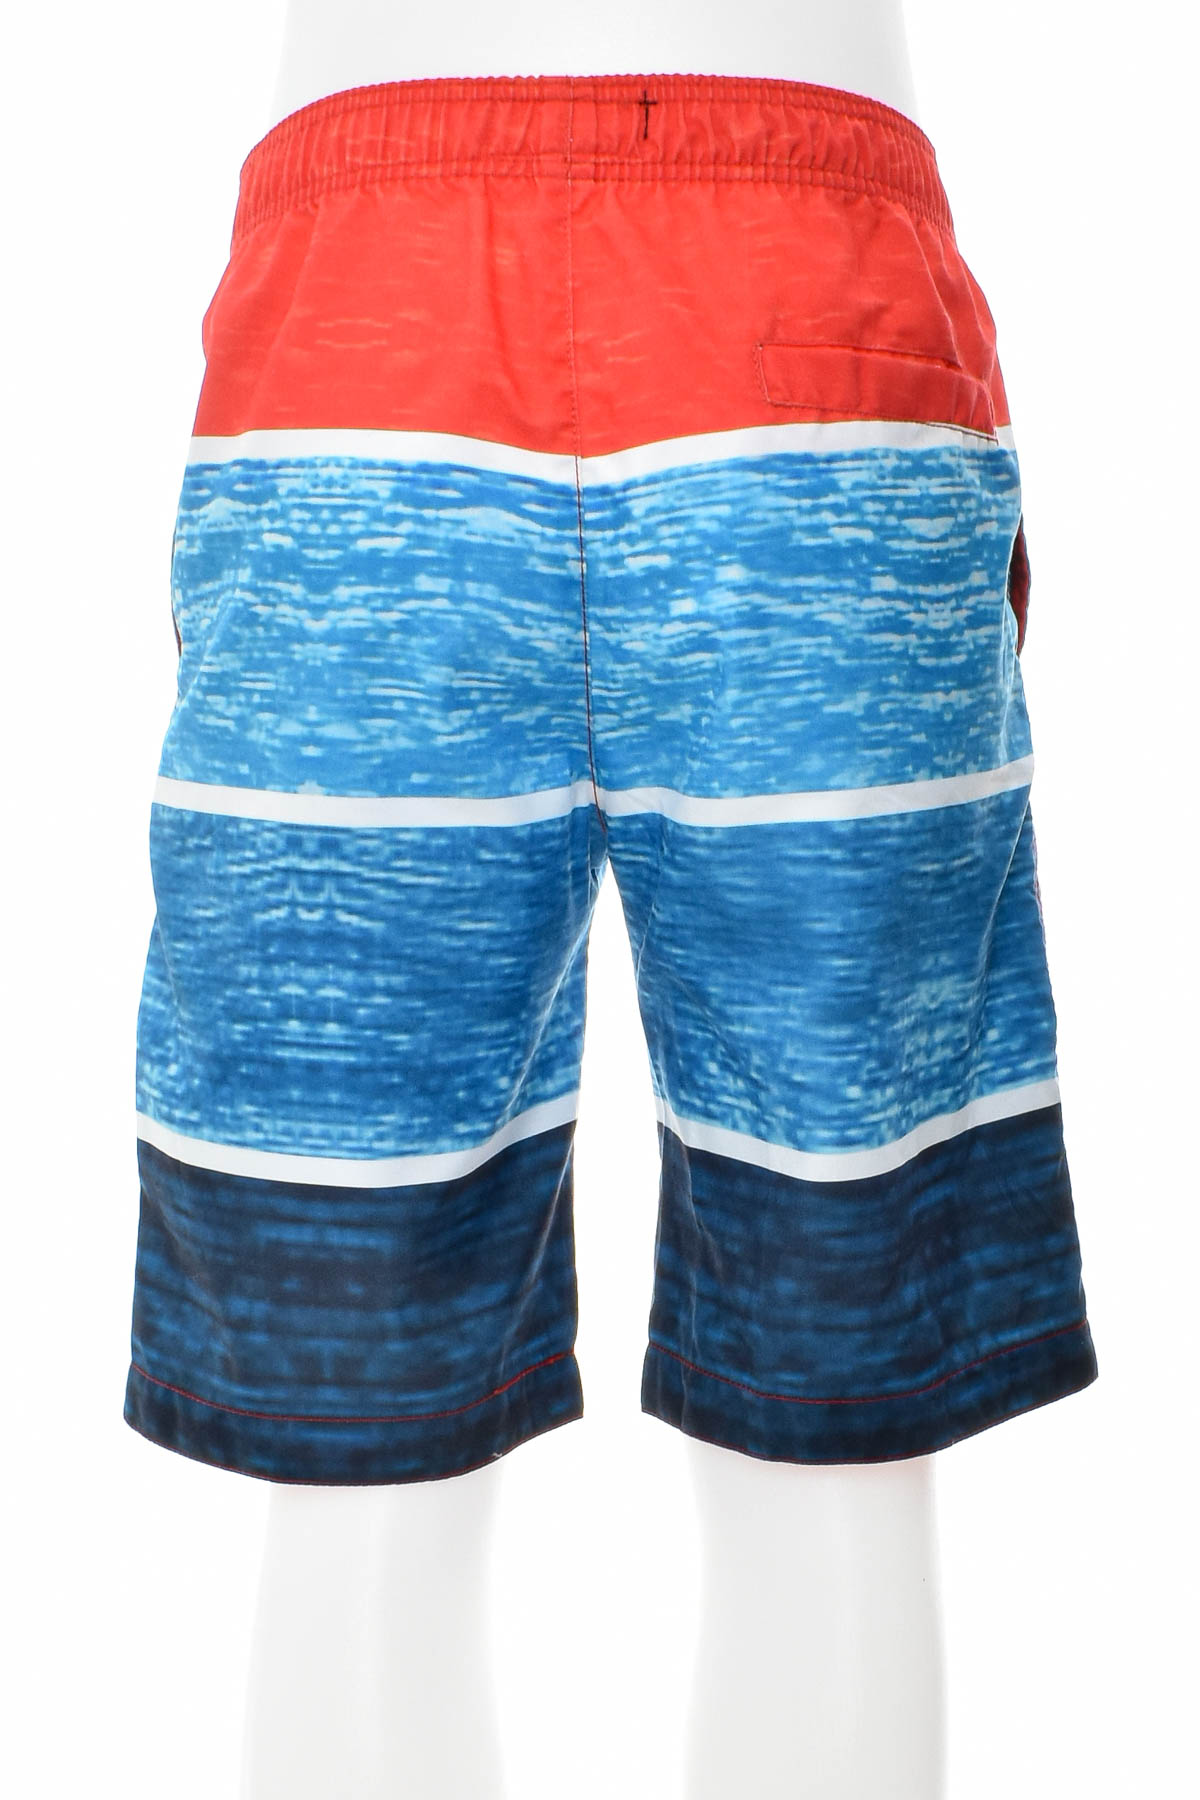 Men's shorts - GWELL - 1